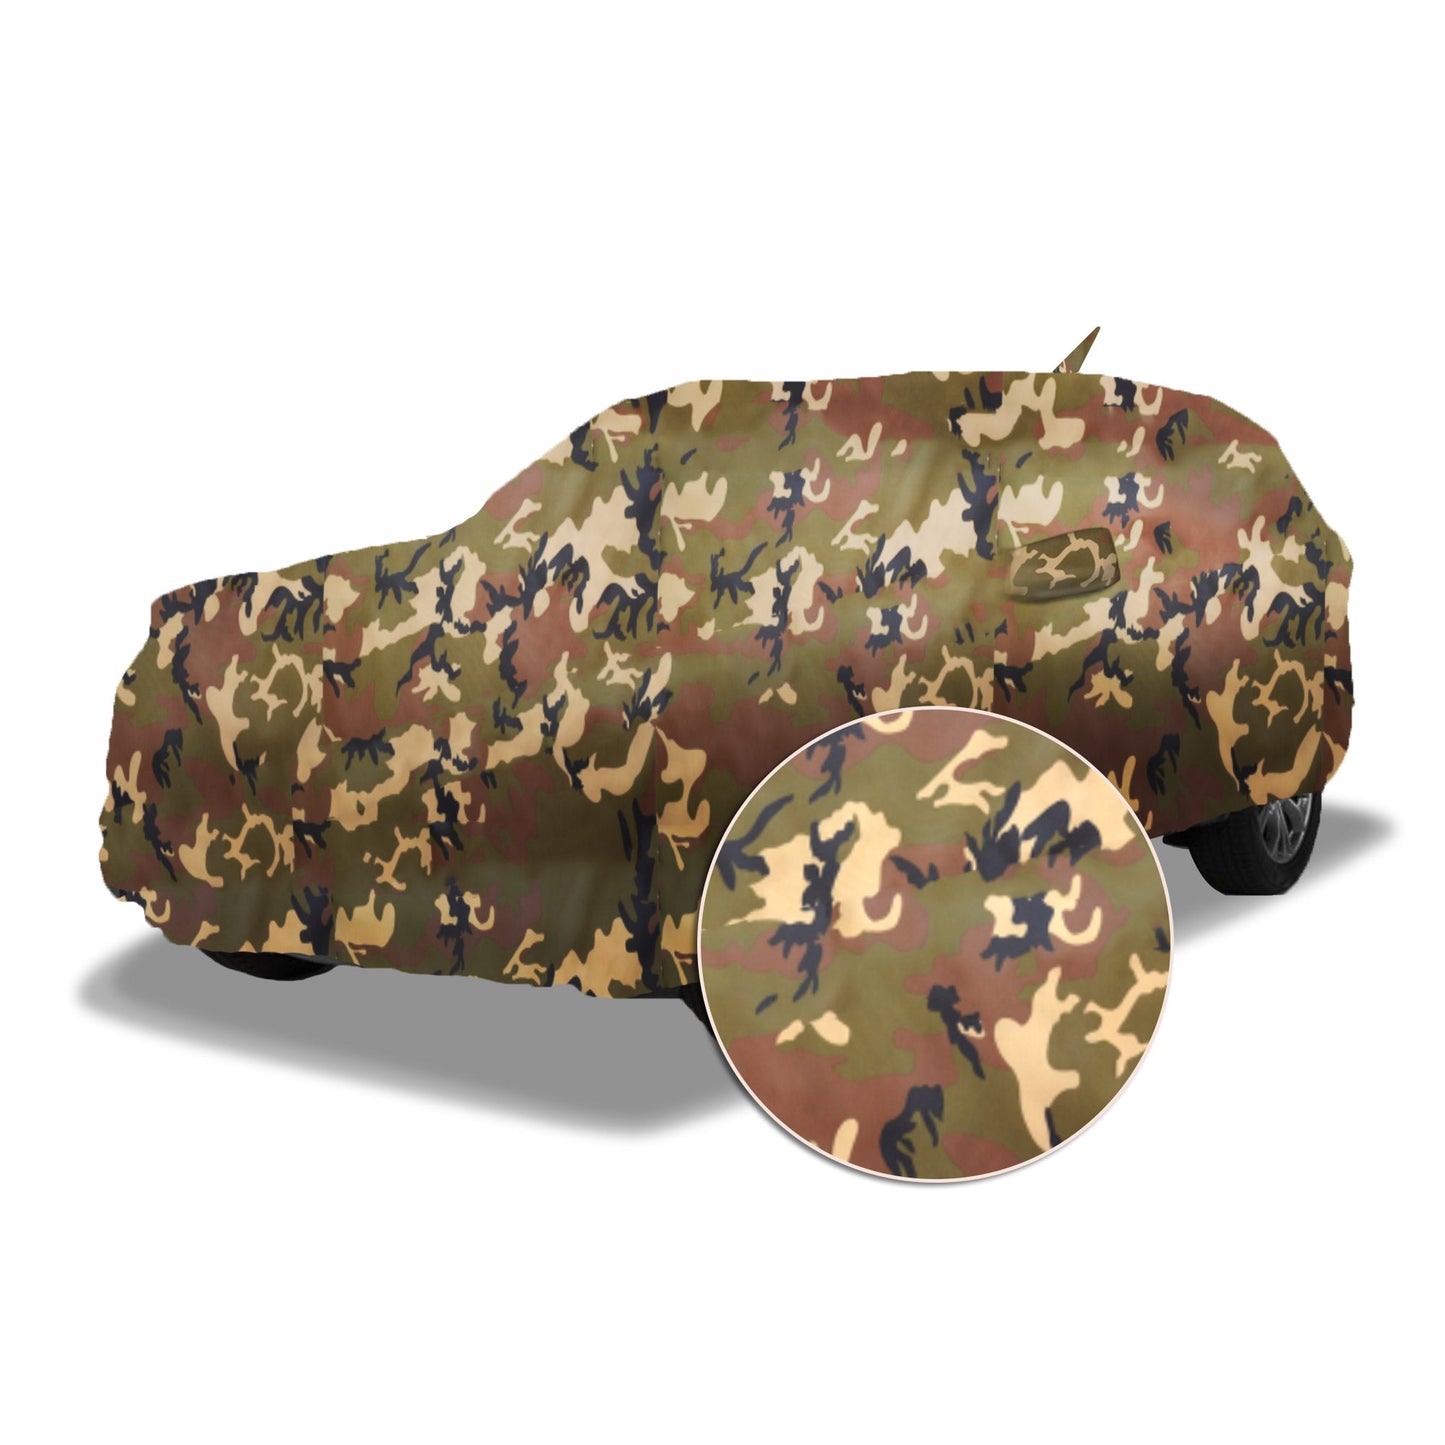 Ascot Nissan Kicks Car Body Cover Extra Strong & Dust Proof Jungle Military Car Cover with UV Proof & Water-Resistant Coating